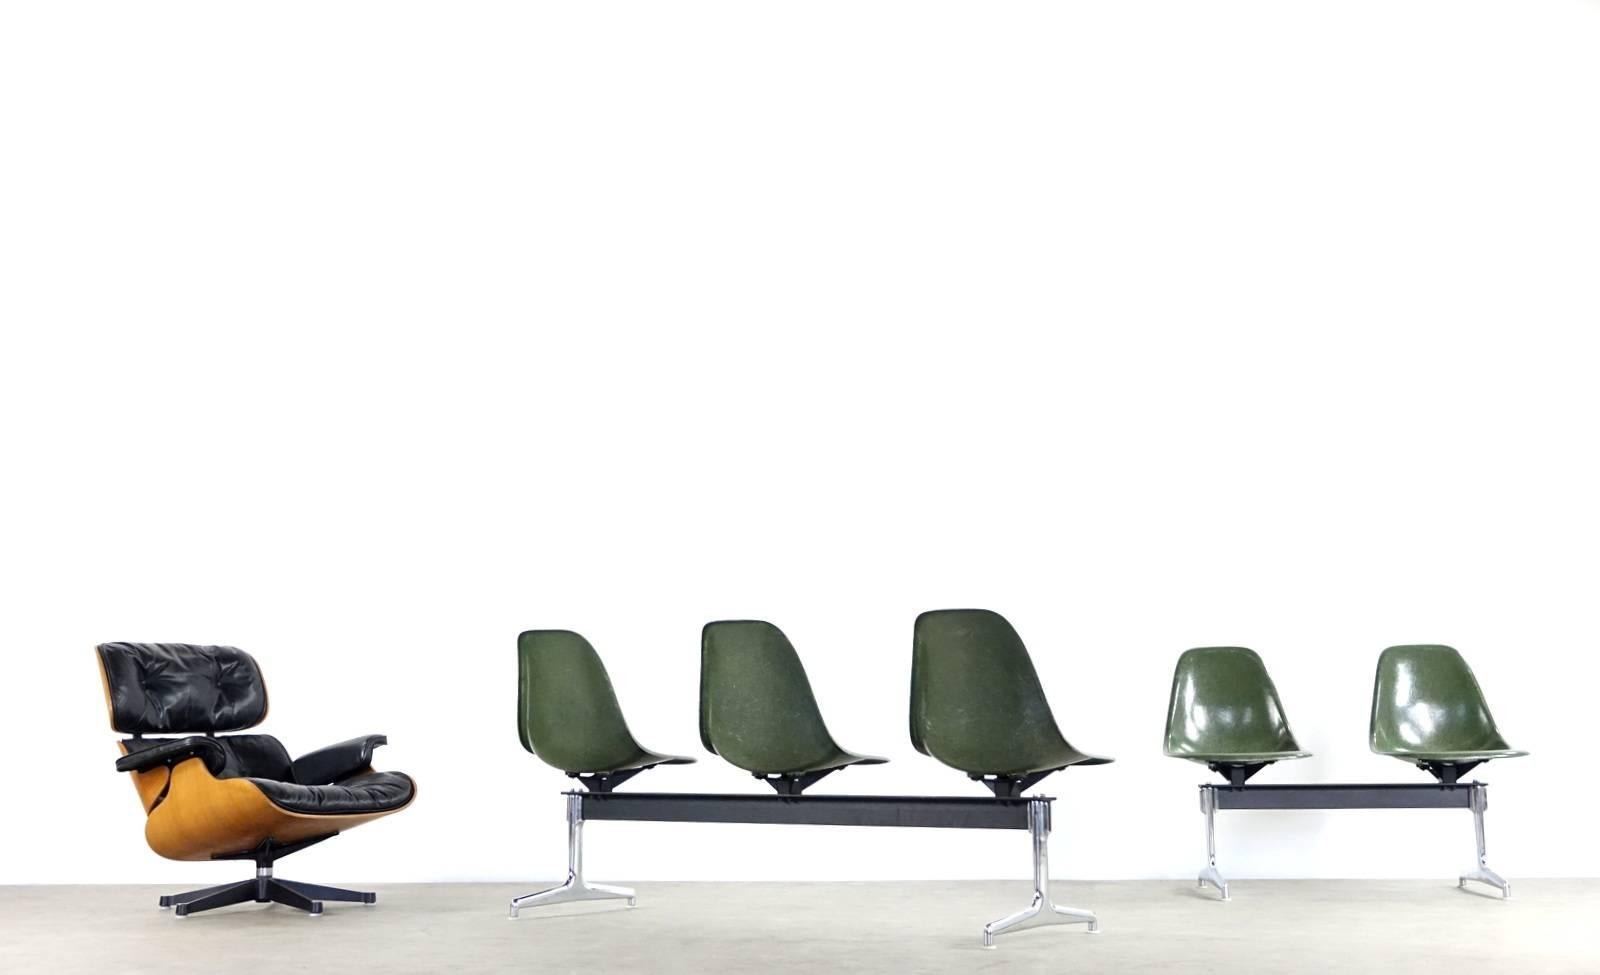 A rather rare and very cocky tandem shell seating designed by Charles & Ray Eames for Herman Miller, USA in the 1960s. The seating has three seats in green fiberglass with a chromed and black metal base.